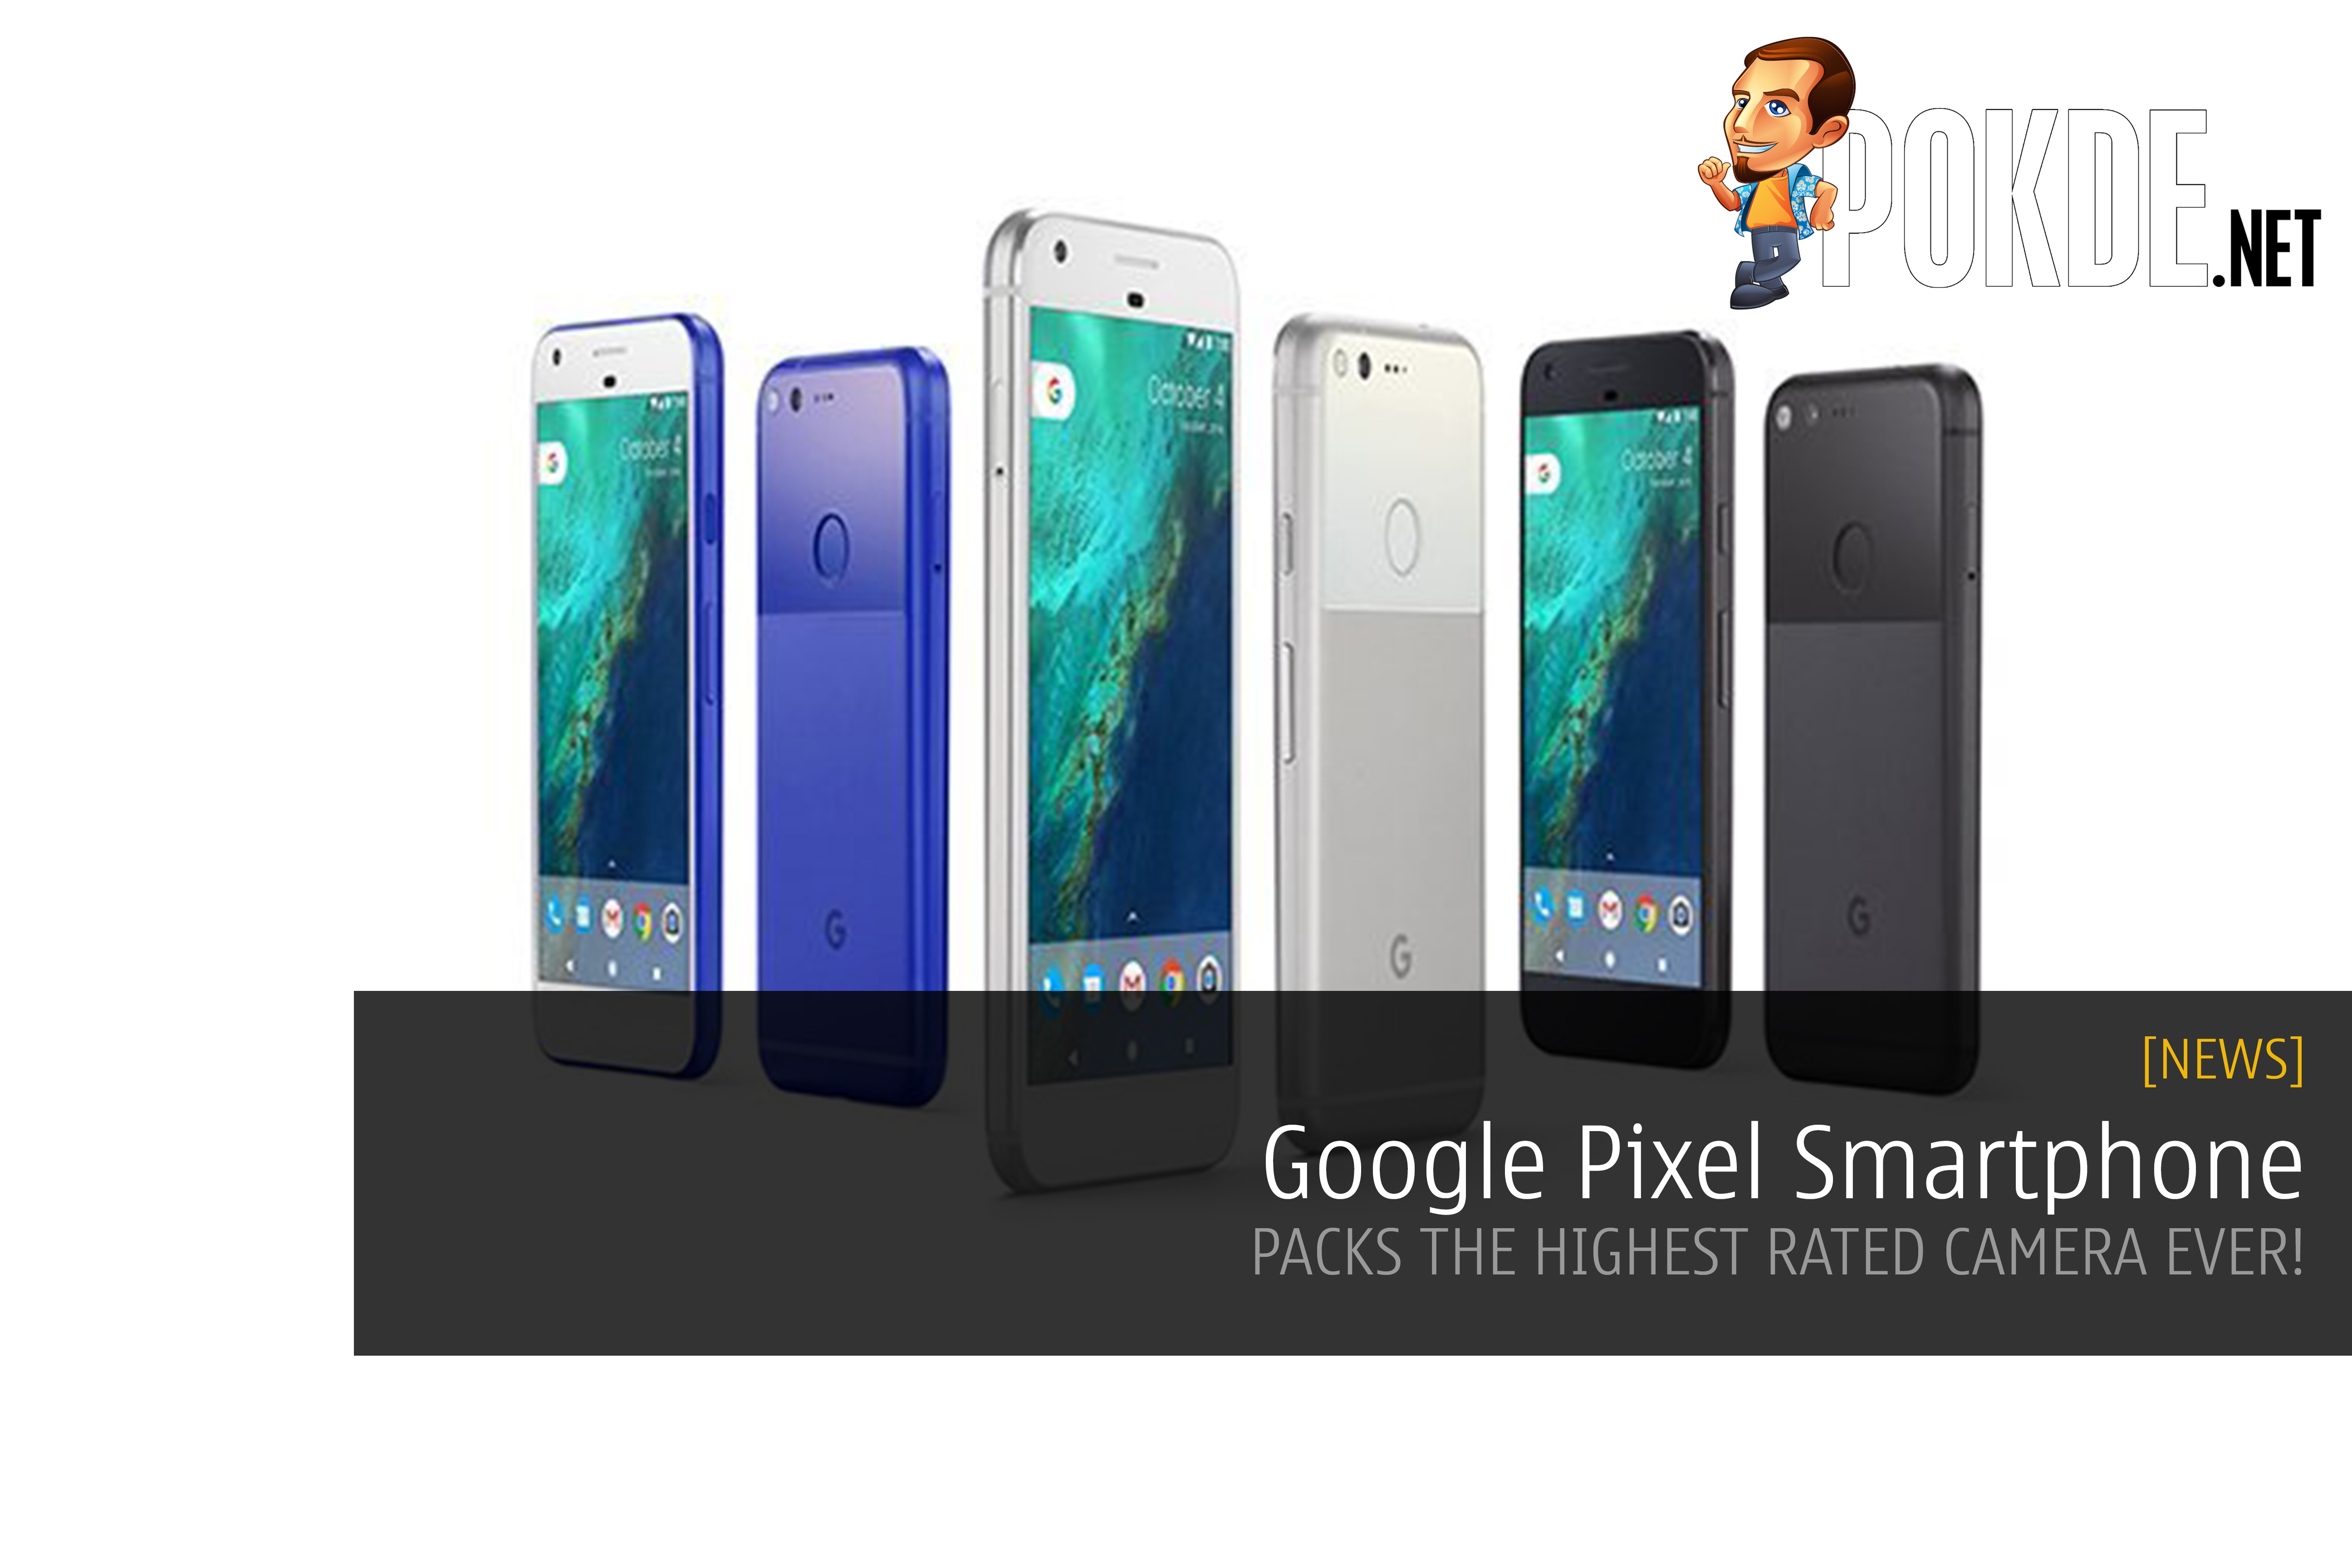 Google Pixel smartphone "made by Google" packs the highest rated camera ever 30